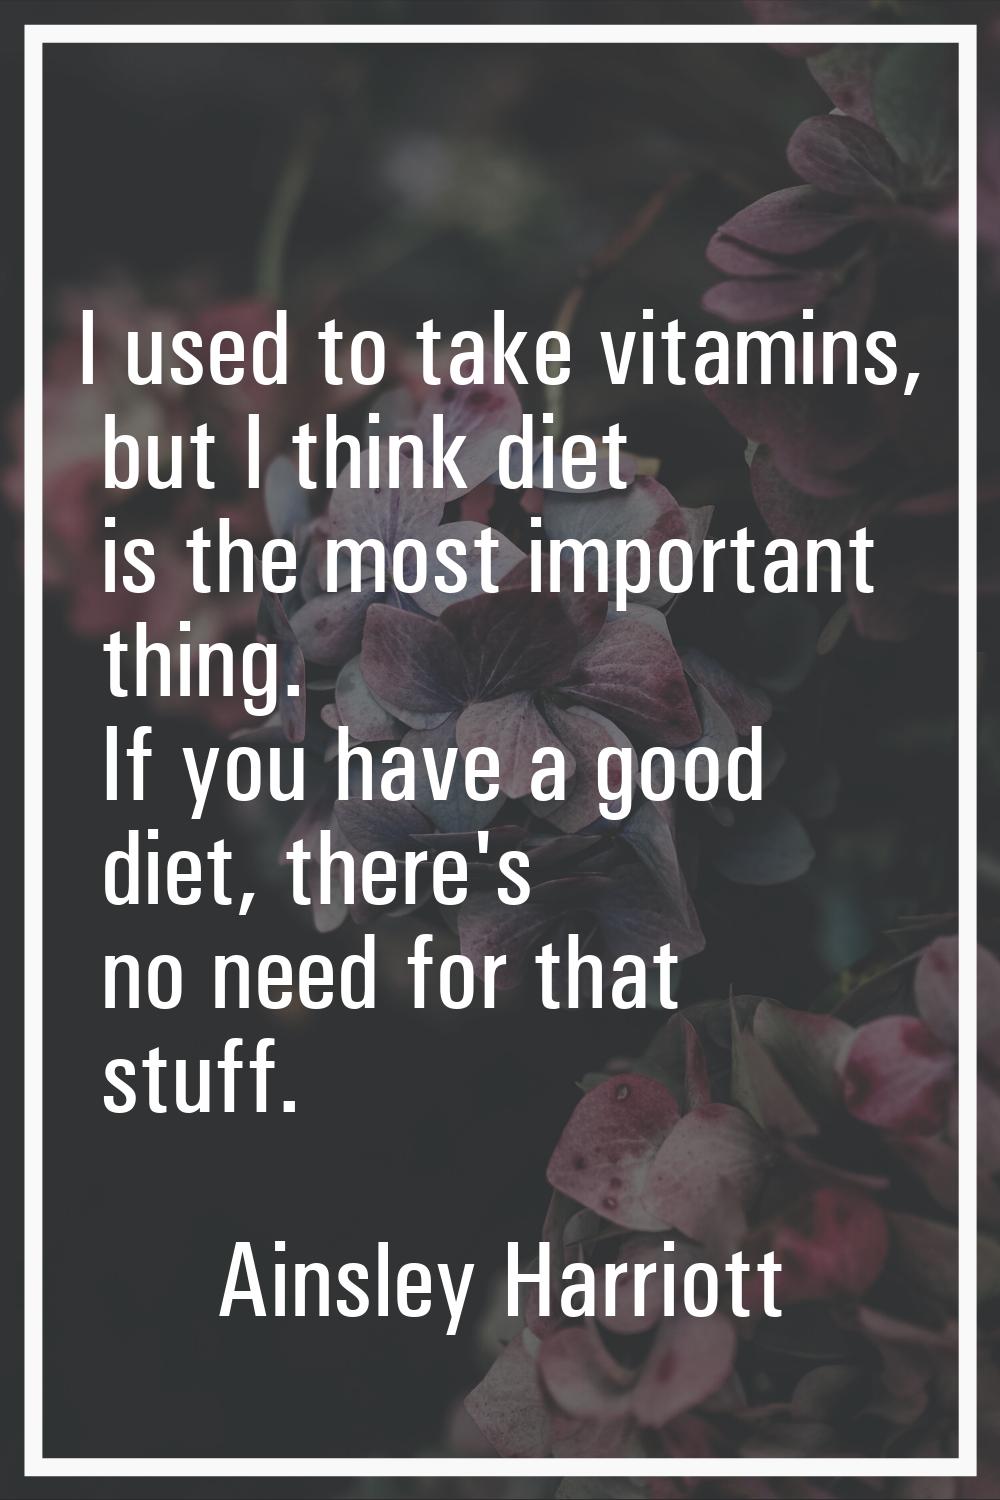 I used to take vitamins, but I think diet is the most important thing. If you have a good diet, the